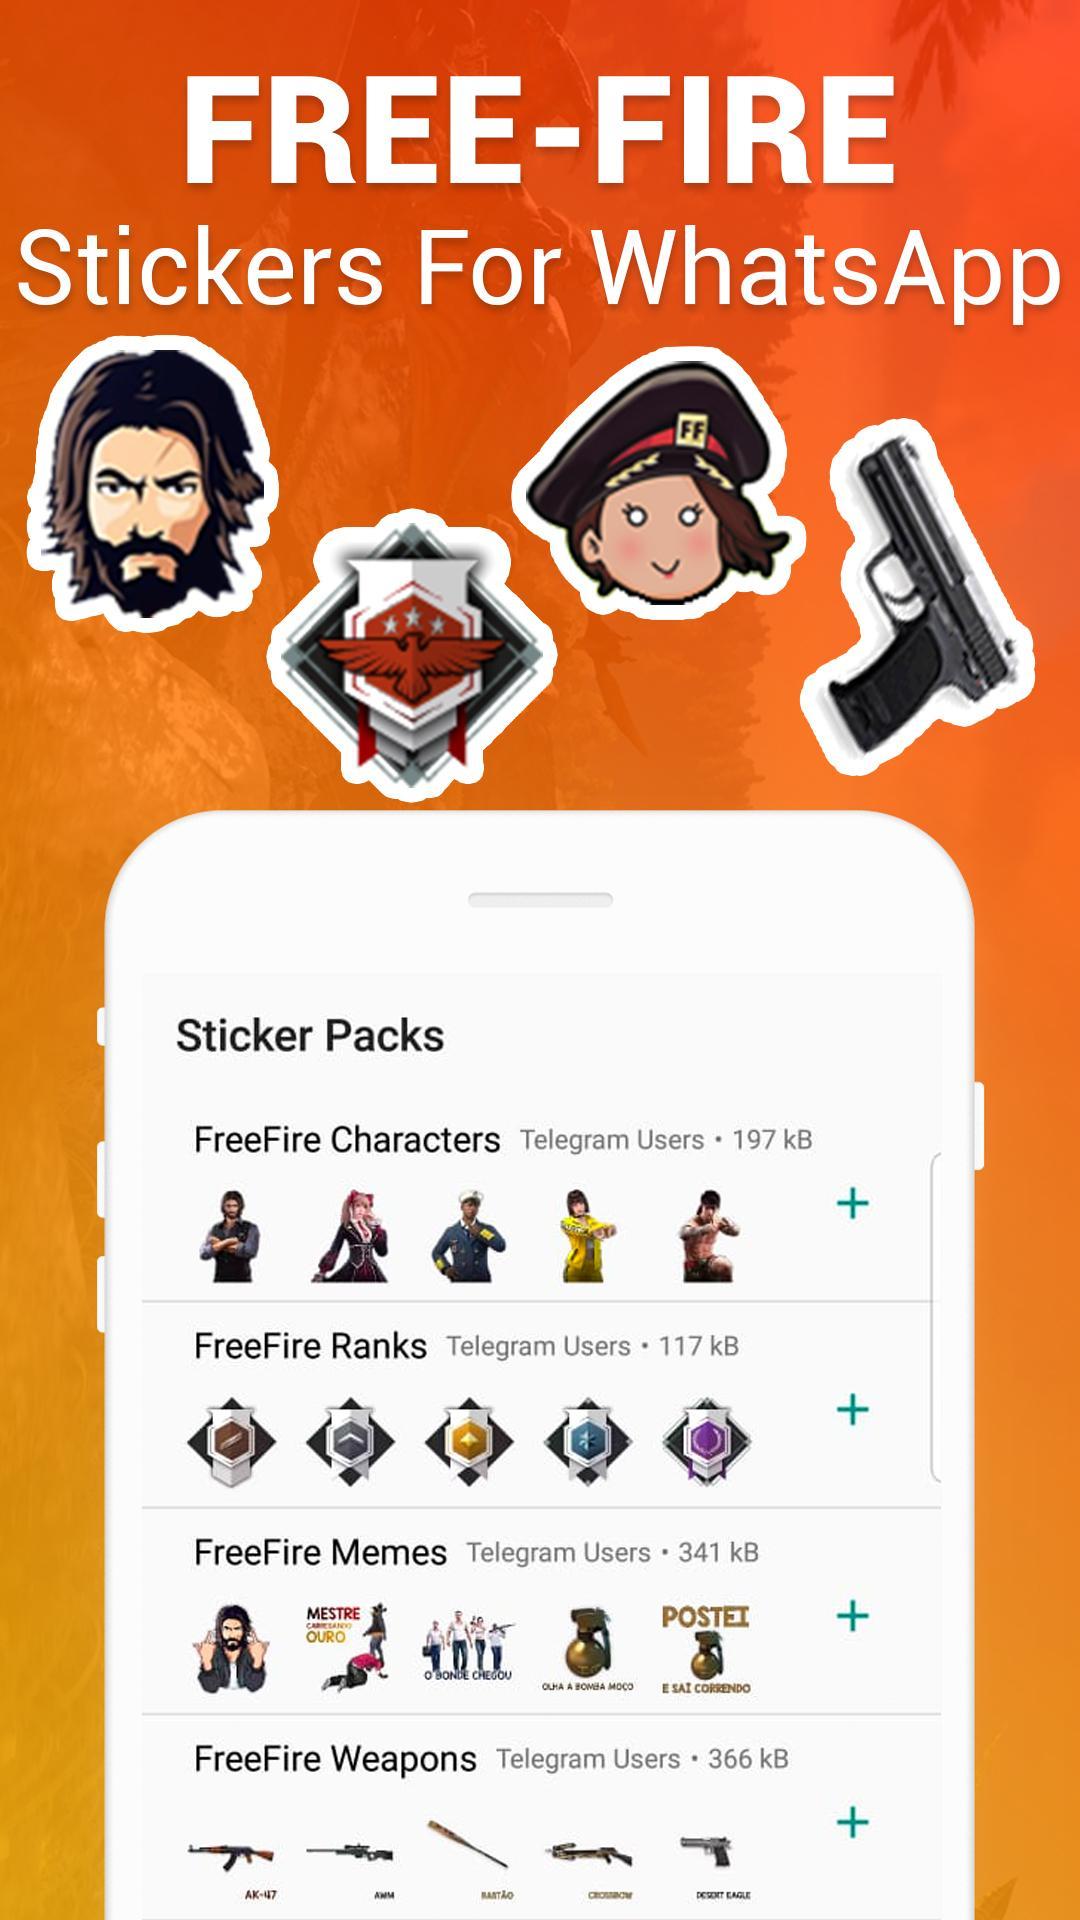 Free Fire Stickers For Whatsapp Wastickerapps For Android - roblox noob meme google search memes graciosos memes y